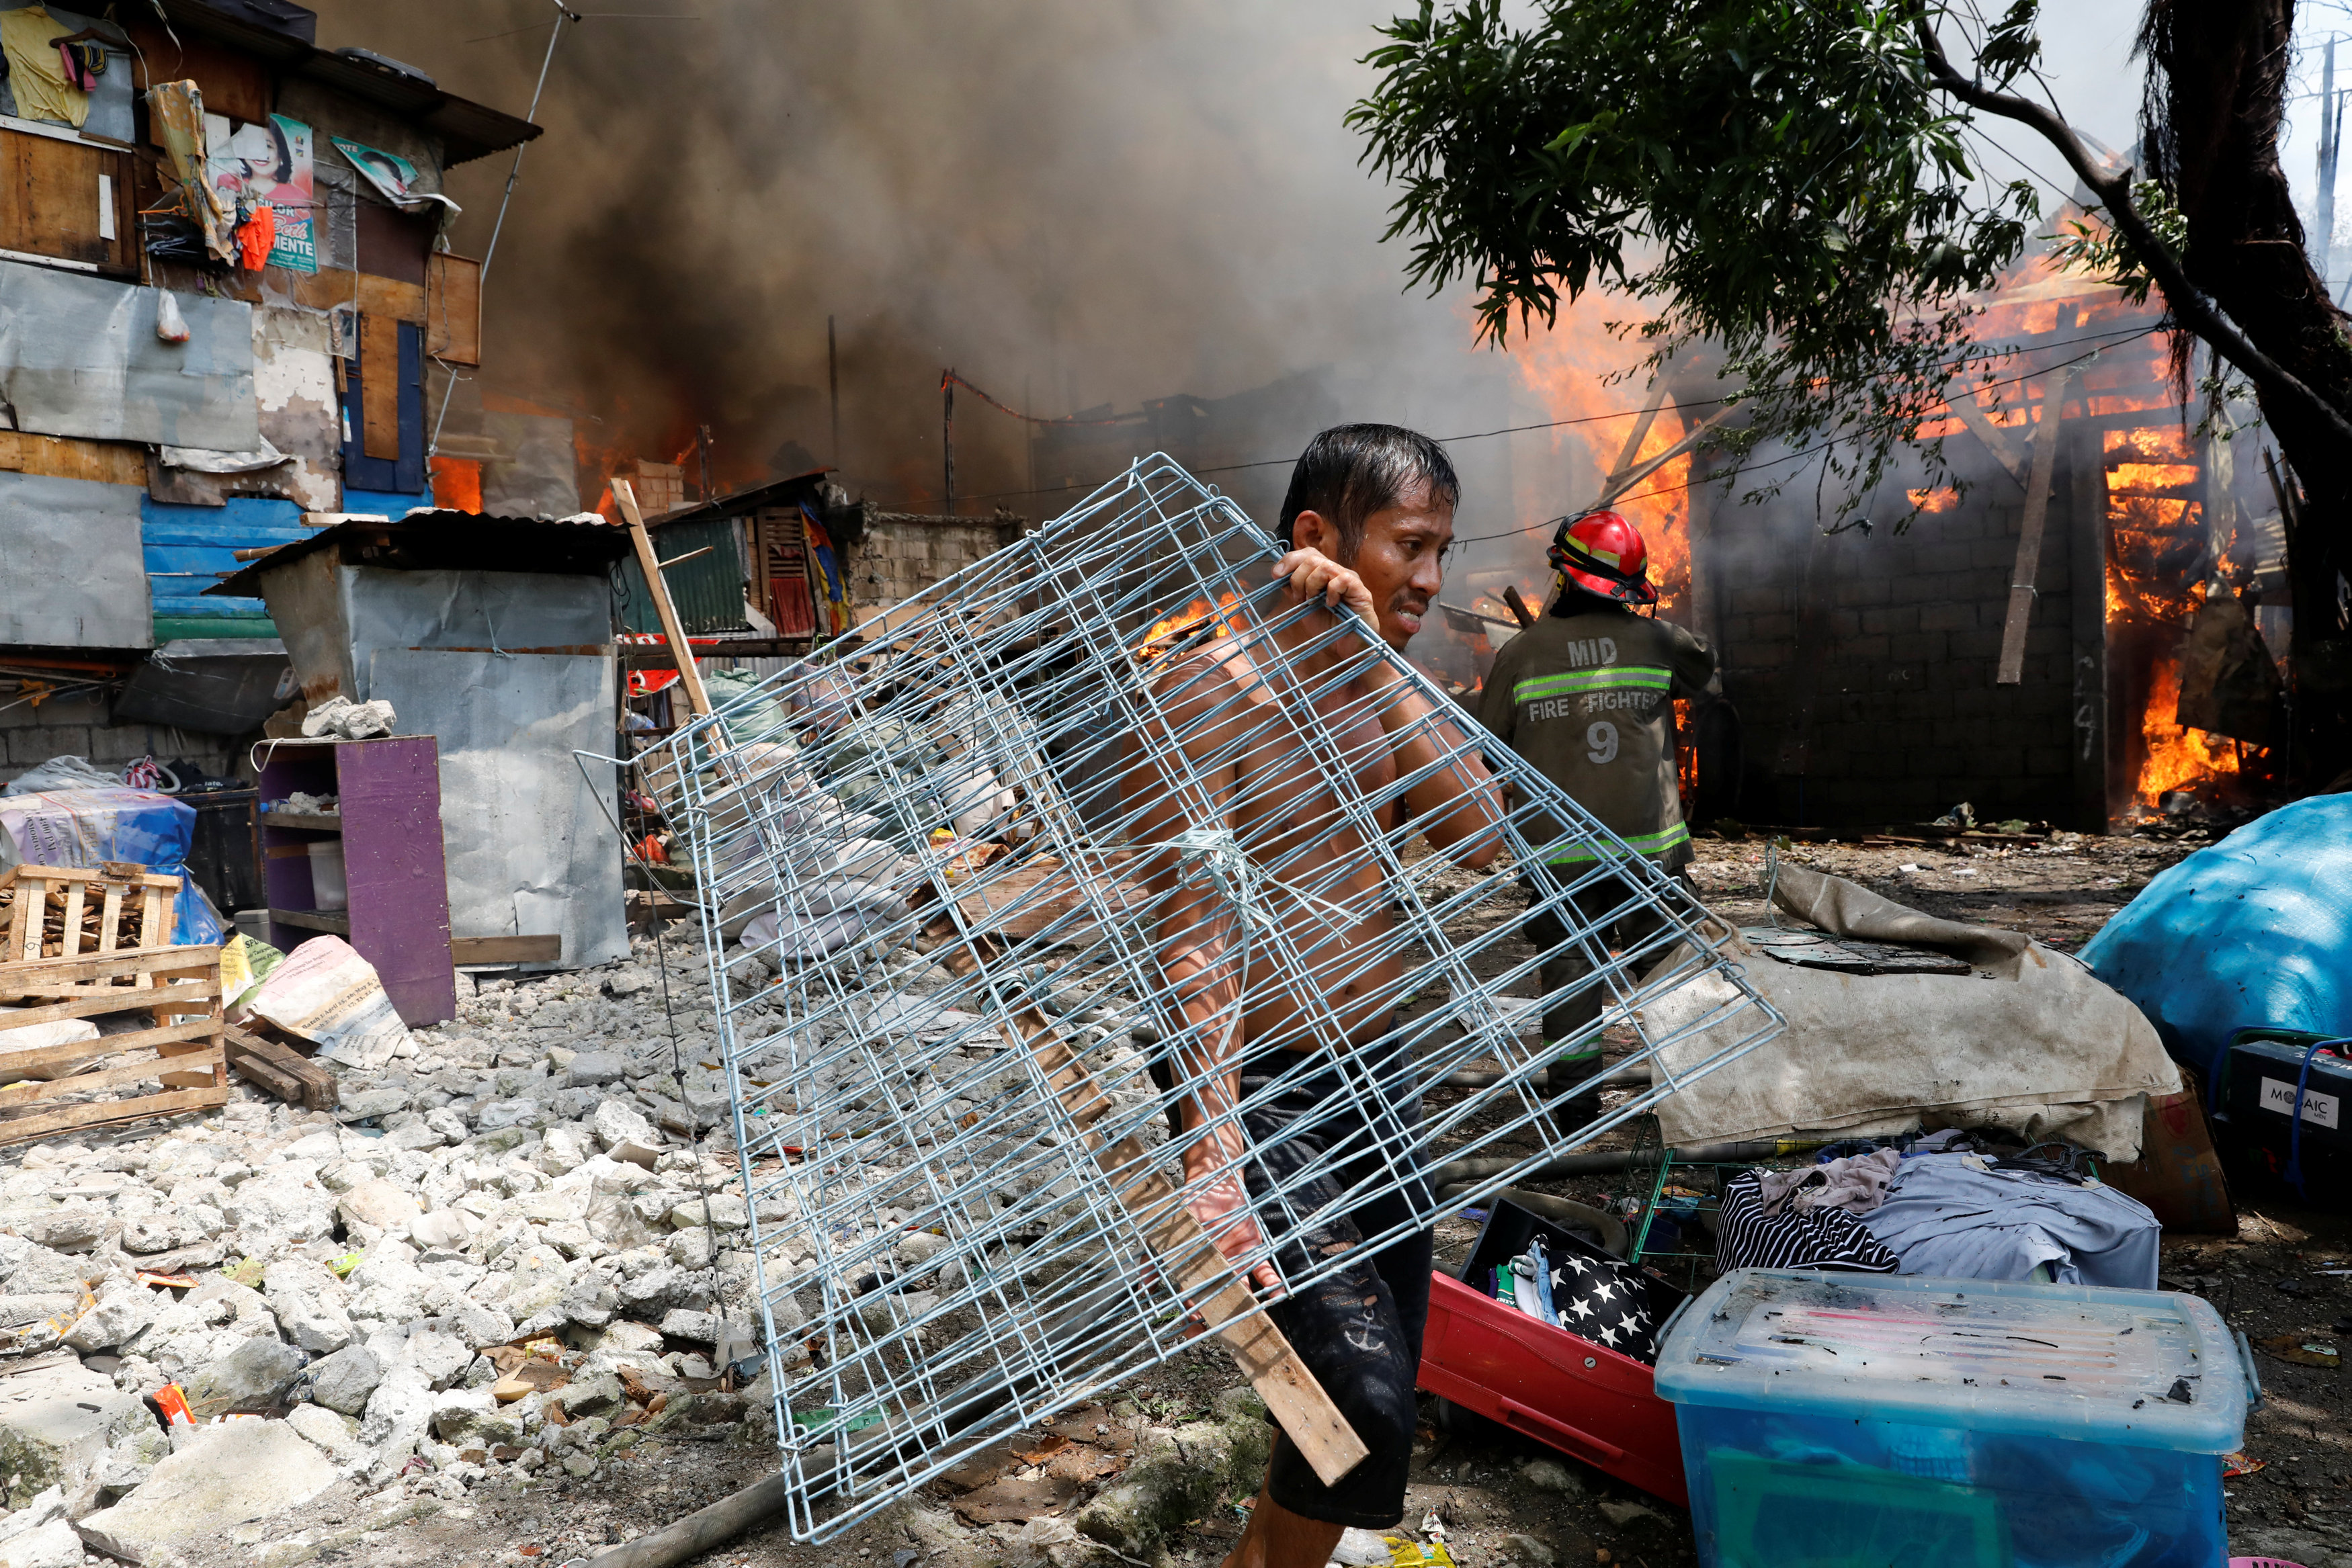 In pictures: Fire engulfs residential area in the Philippines